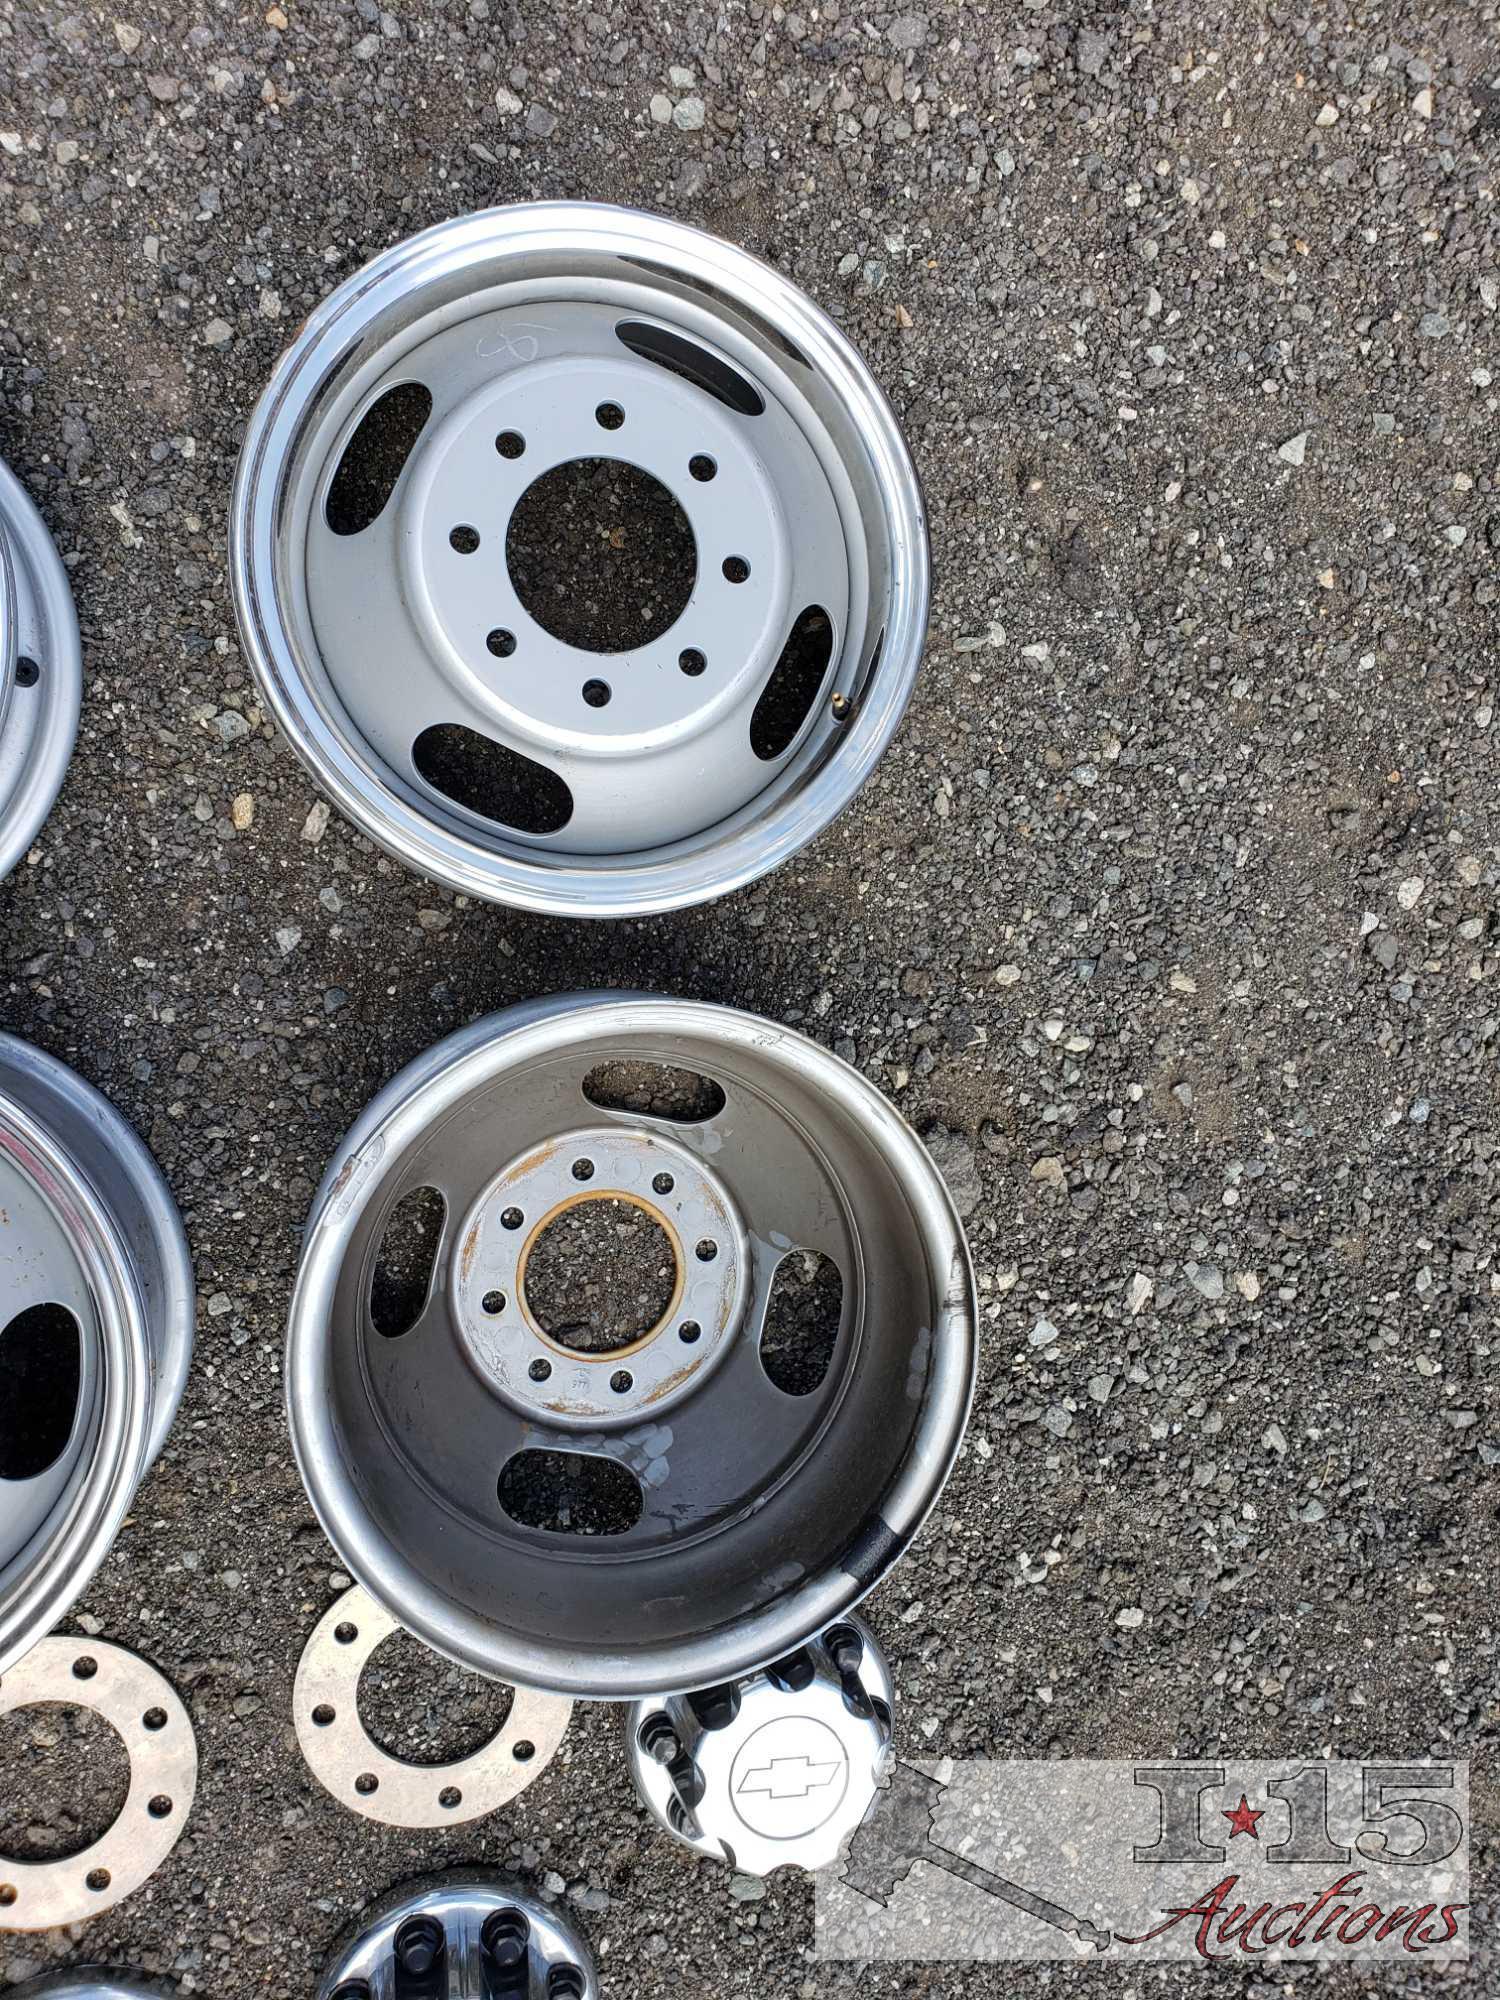 4 OEM Chevy Wheels, Came Off of 2005 3500 Dually